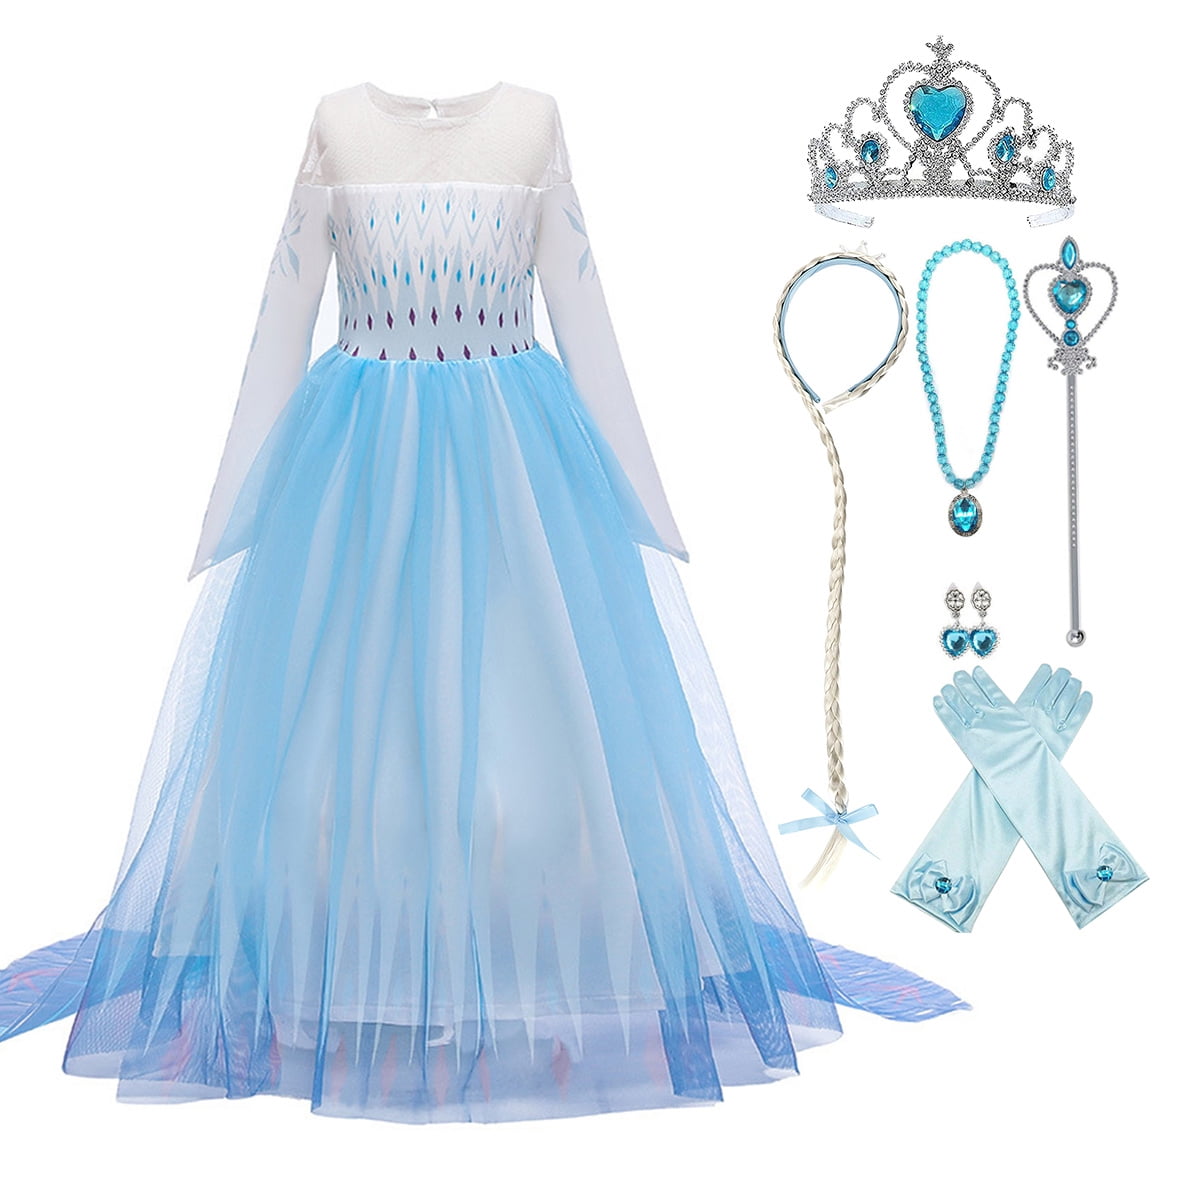 Girls Snow Queen Fancy Dress Up Costume Long Sleeve Elsa Anna Dress Halloween Christmas Outfit Age 4-10 Years